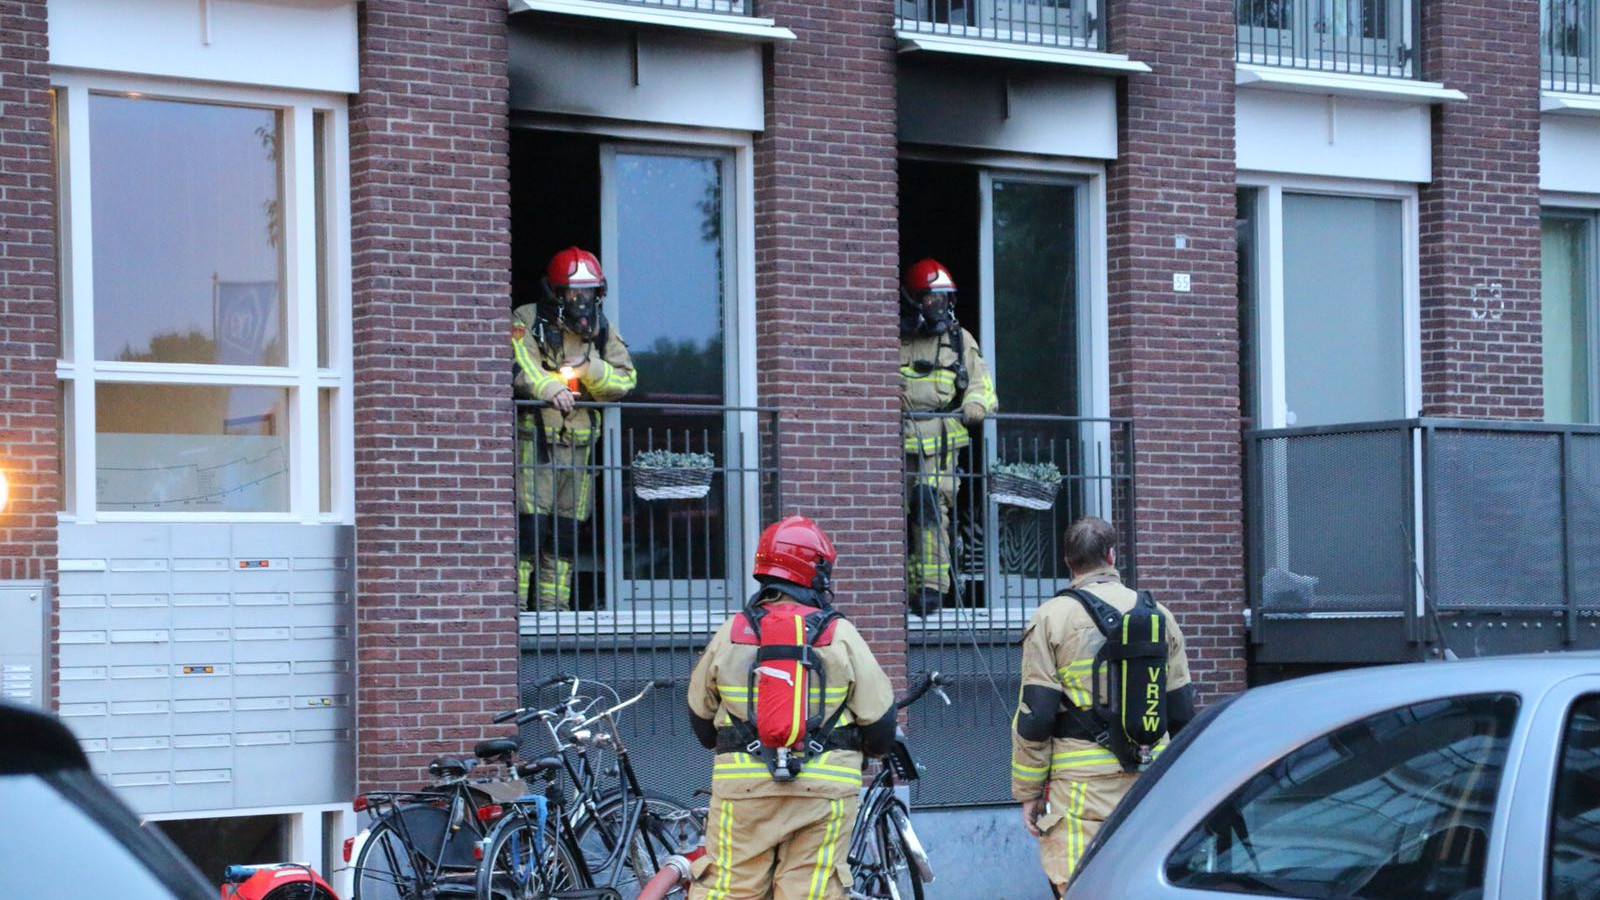 Brand in appartement Purmerend, hamster gered